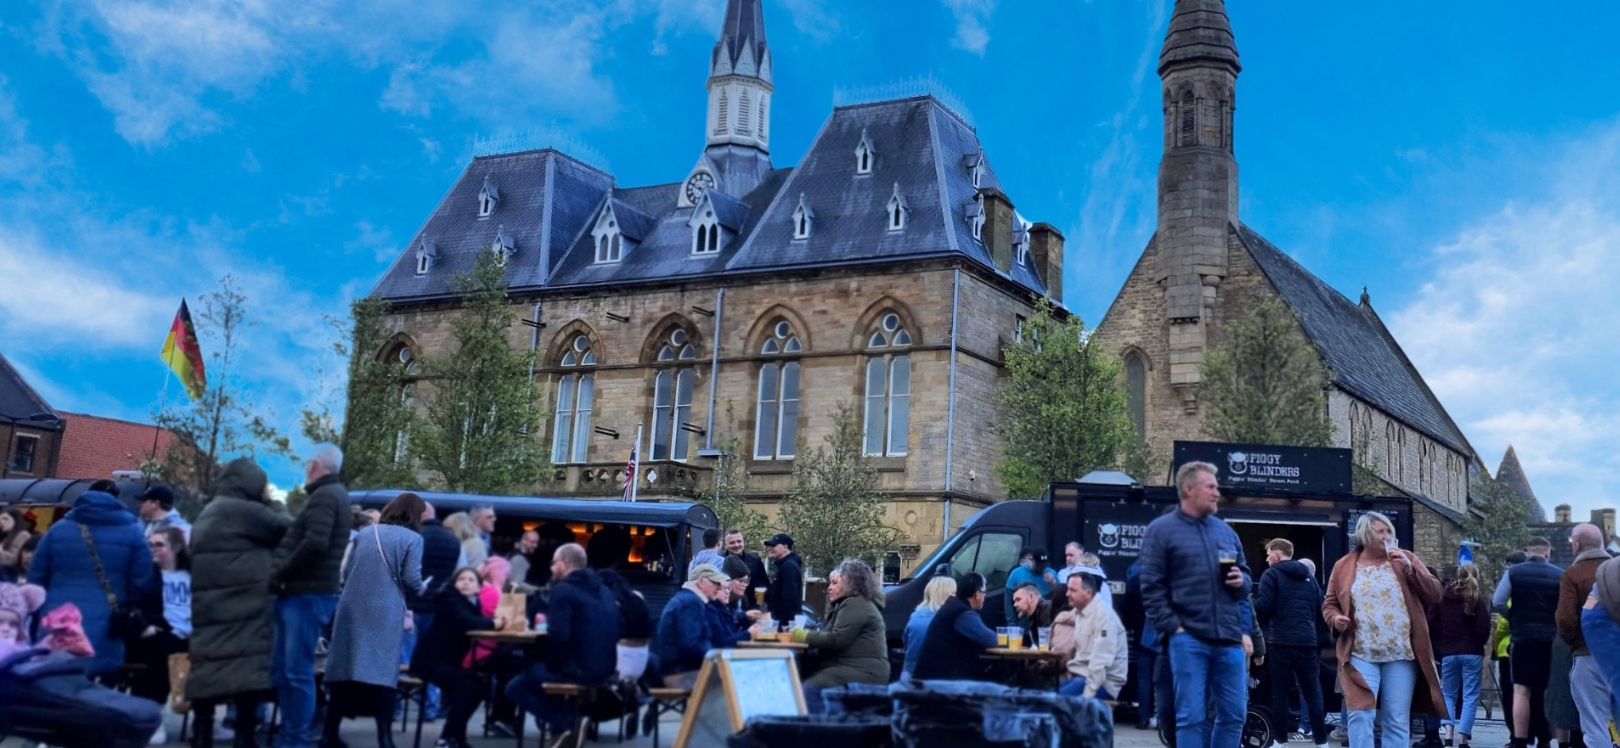 previous Baccanalia market event held at Bishop Auckland